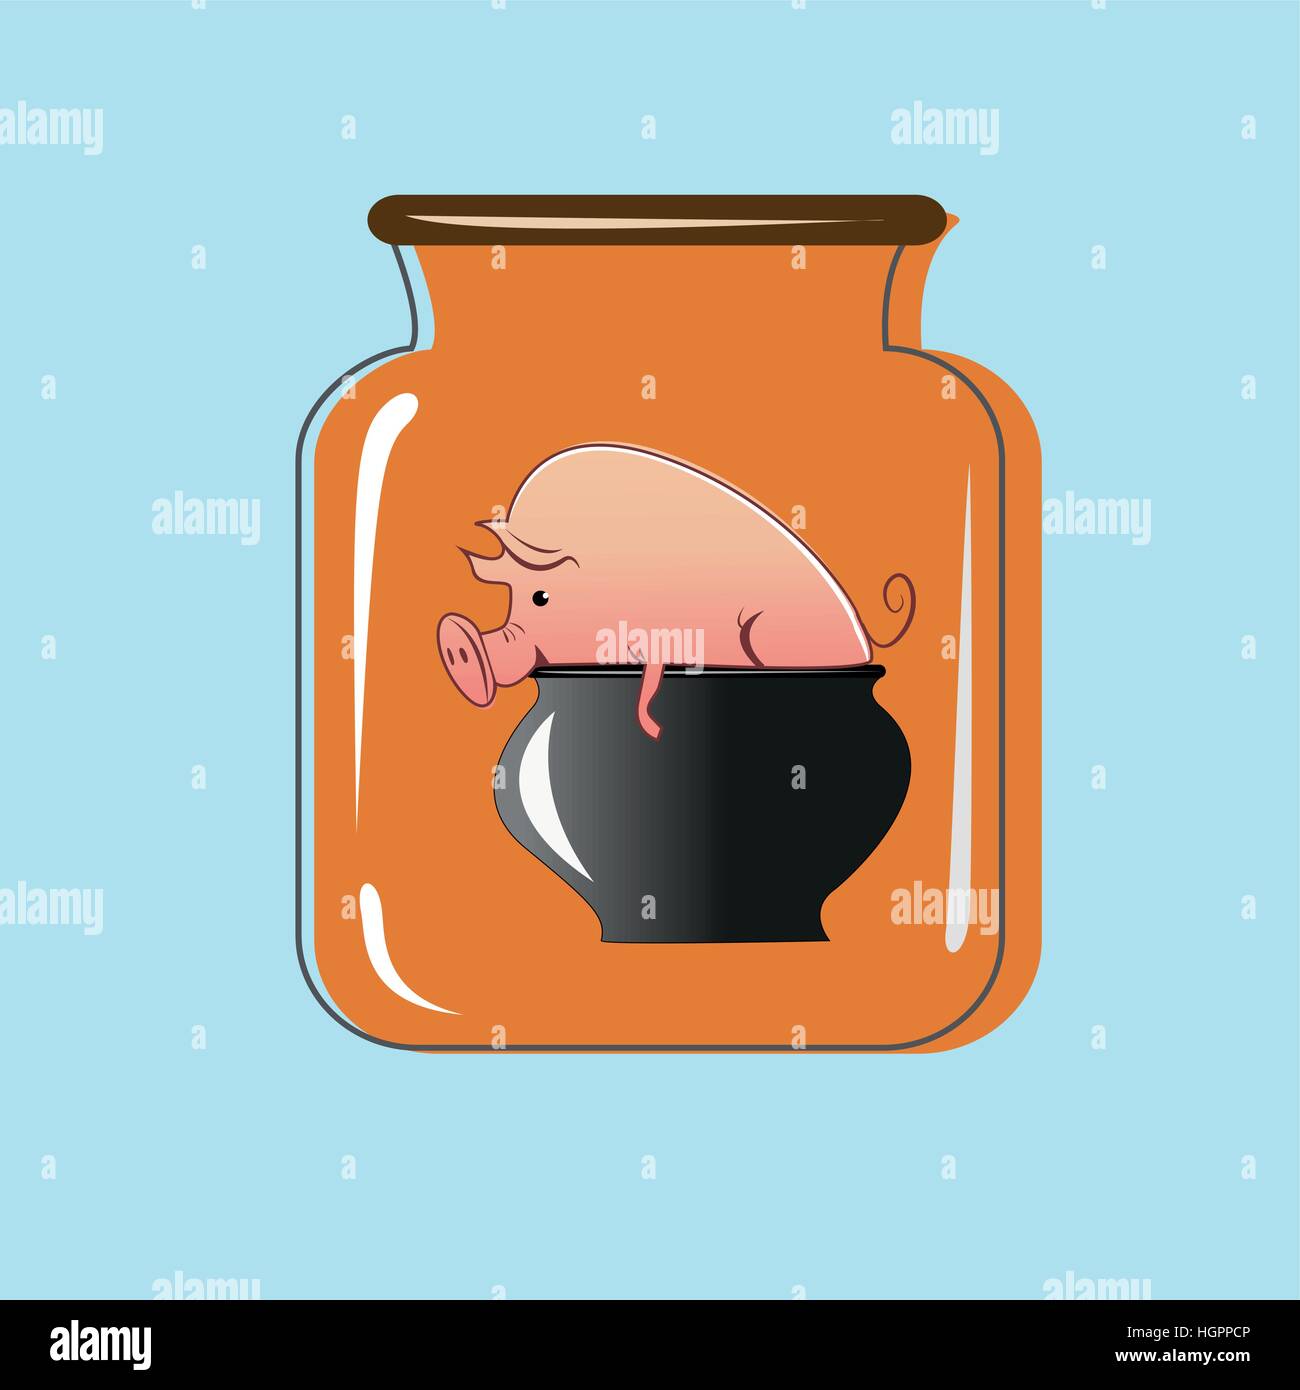 Glass jar with canning pork. Vector design Stock Vector